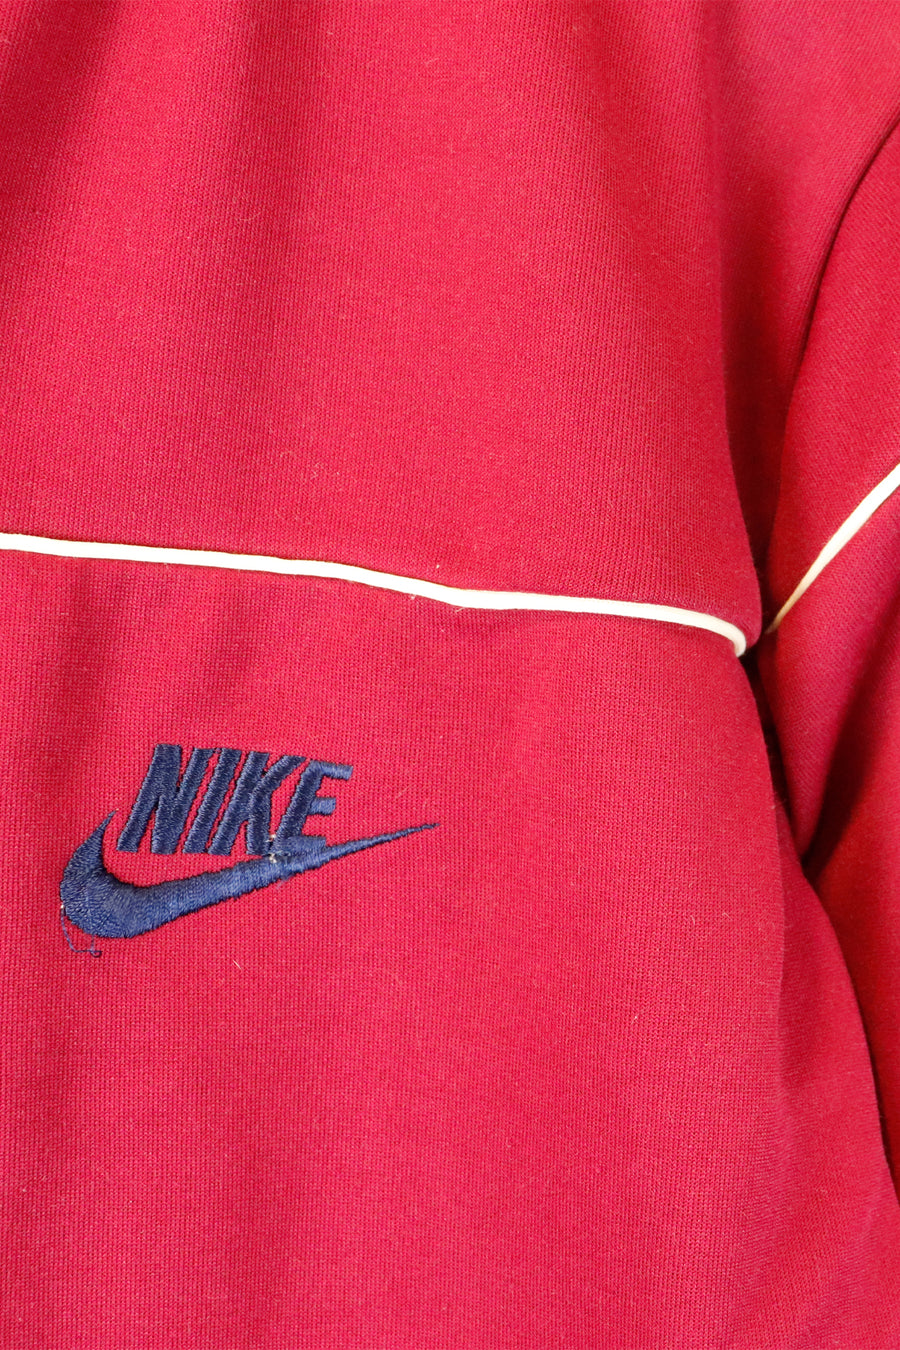 Vintage Nike Two Piece Set Zip Up Embroidered Sport Jacket And Matching Pants Sweatshirt Sz M